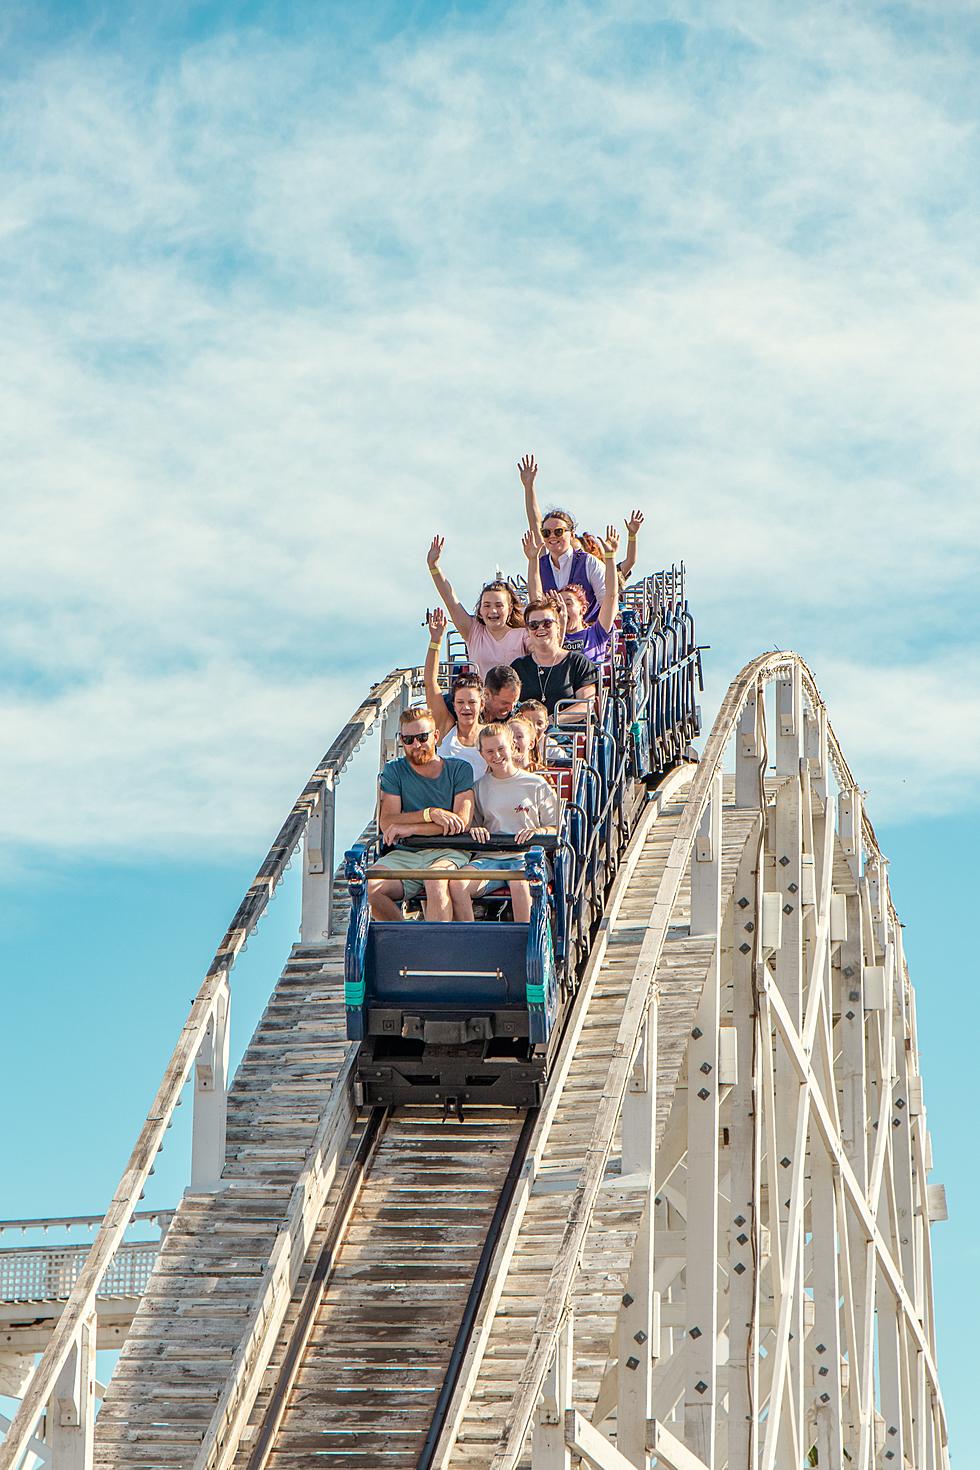 Adventureland Bus Trips from Dubuque only $50!